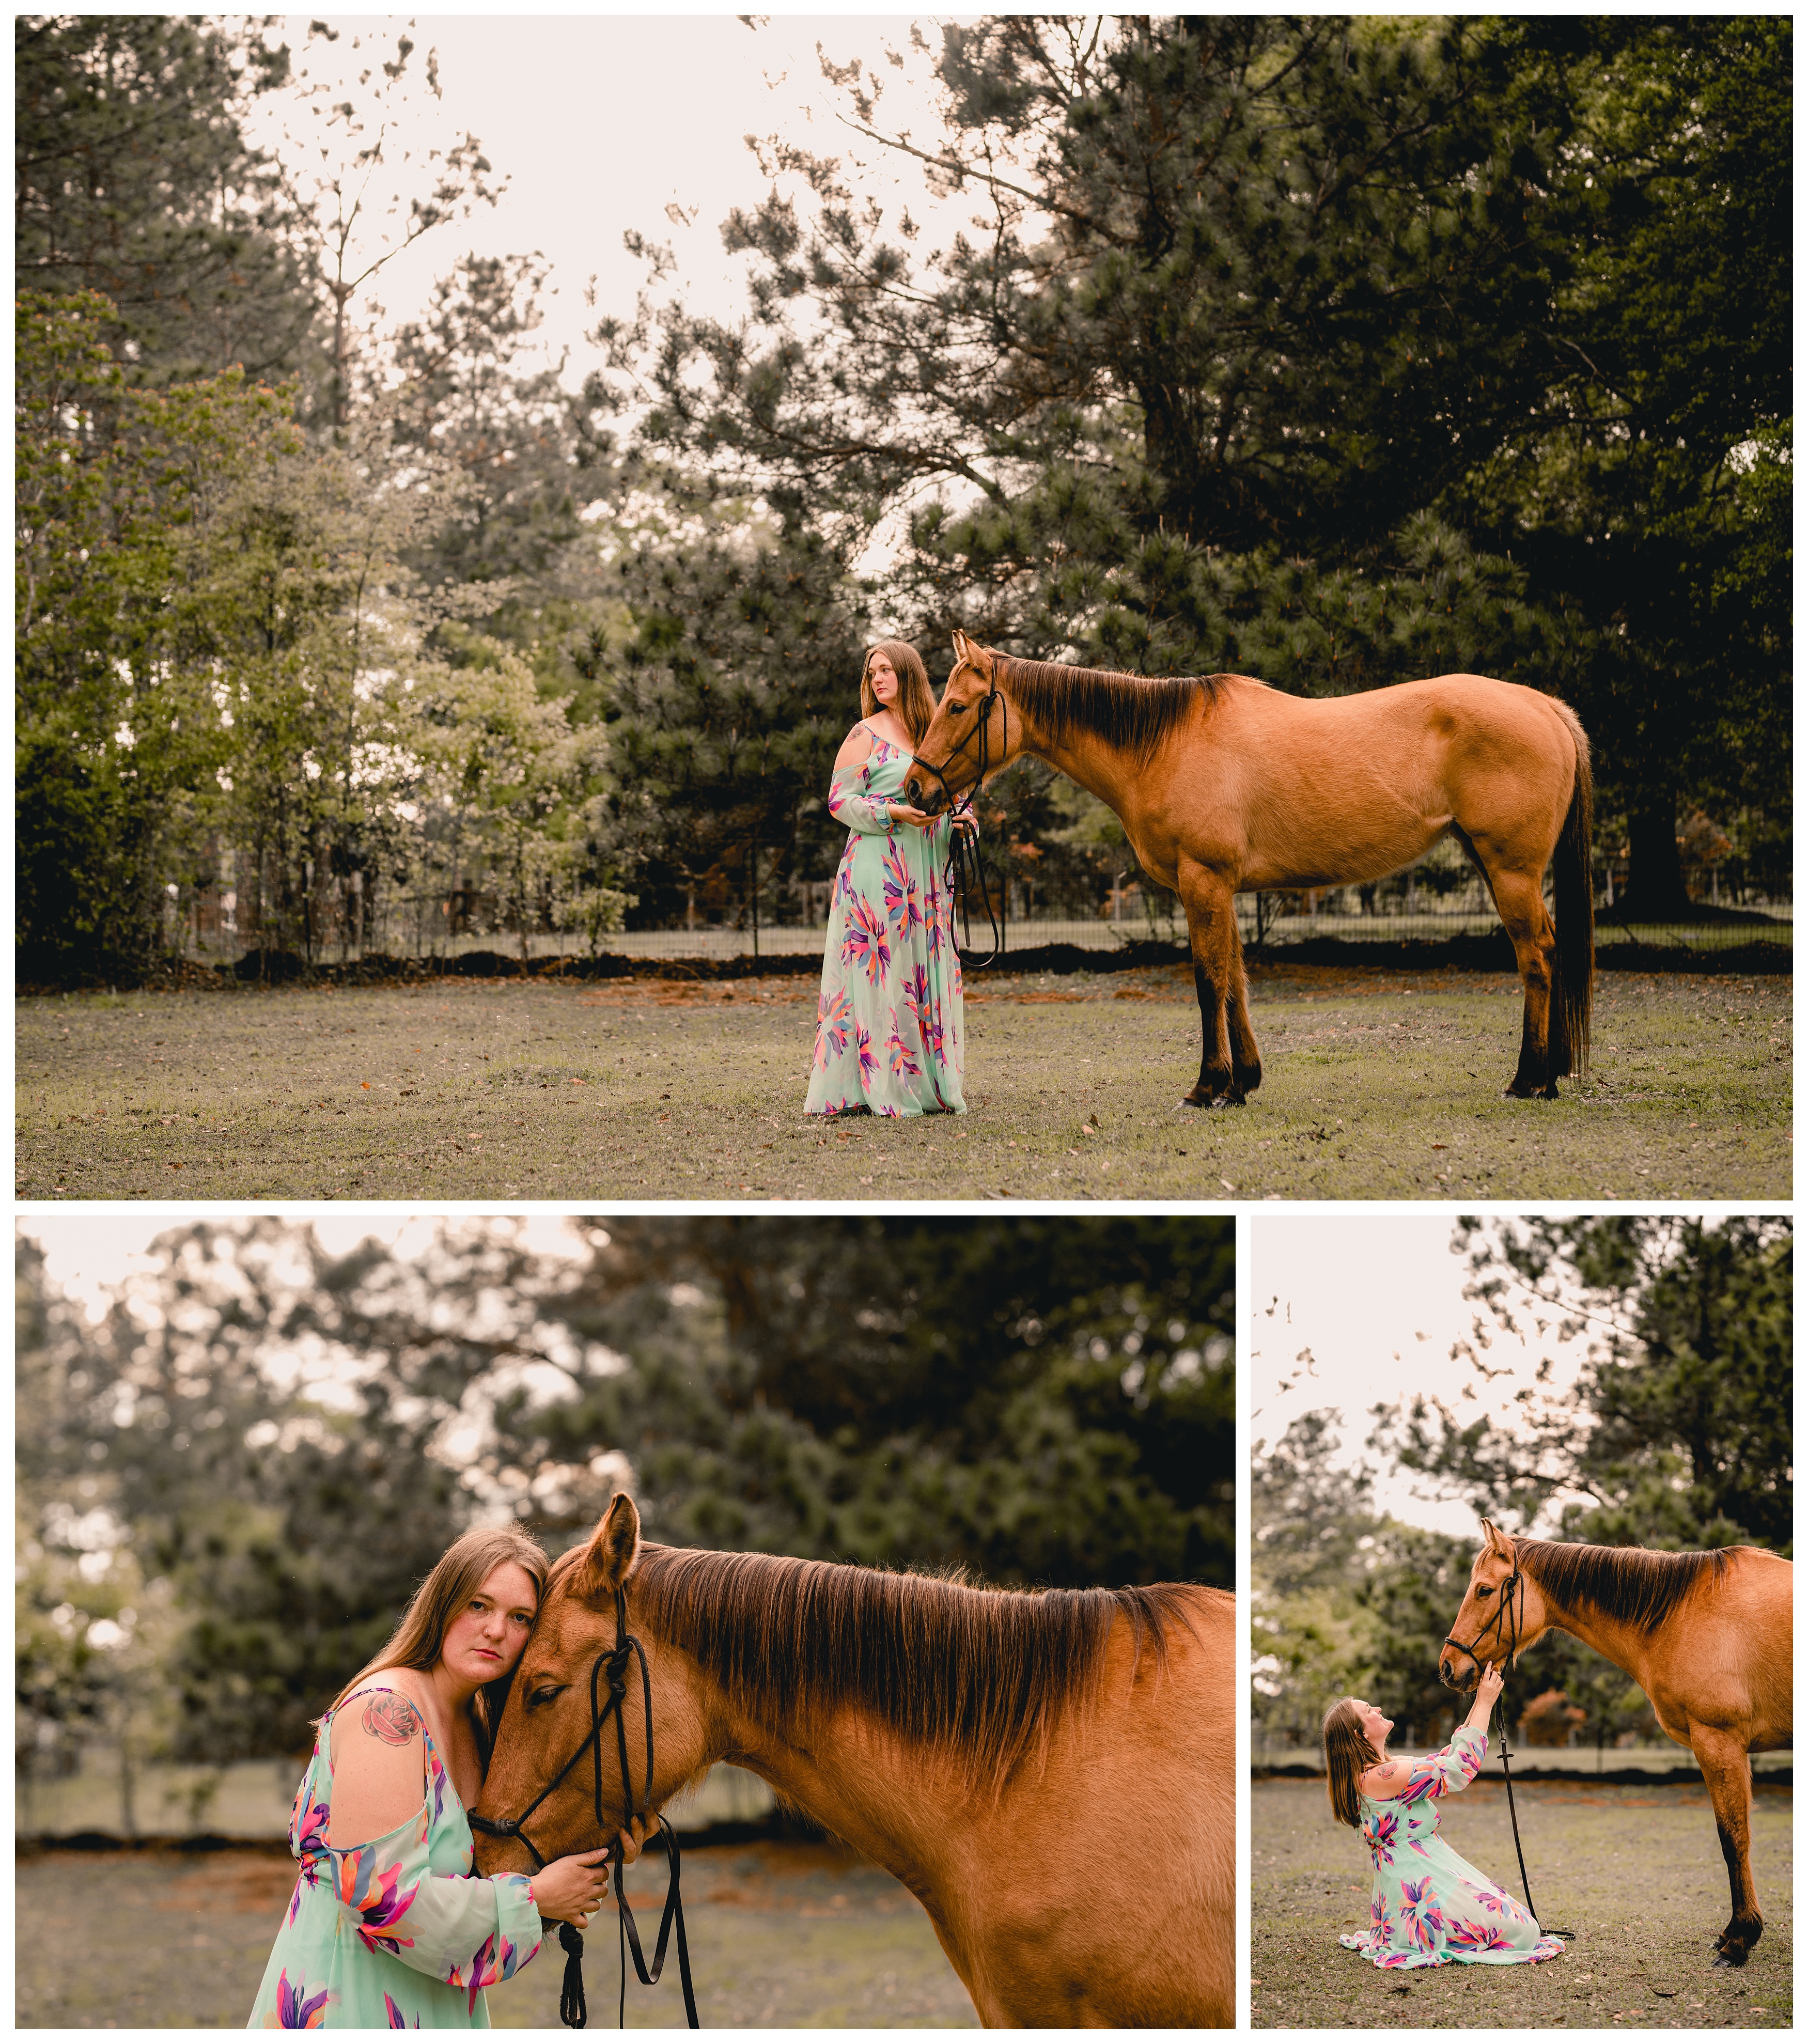 Intimate and emotional horse portraits between horse and rider by professional equine photographer in flo